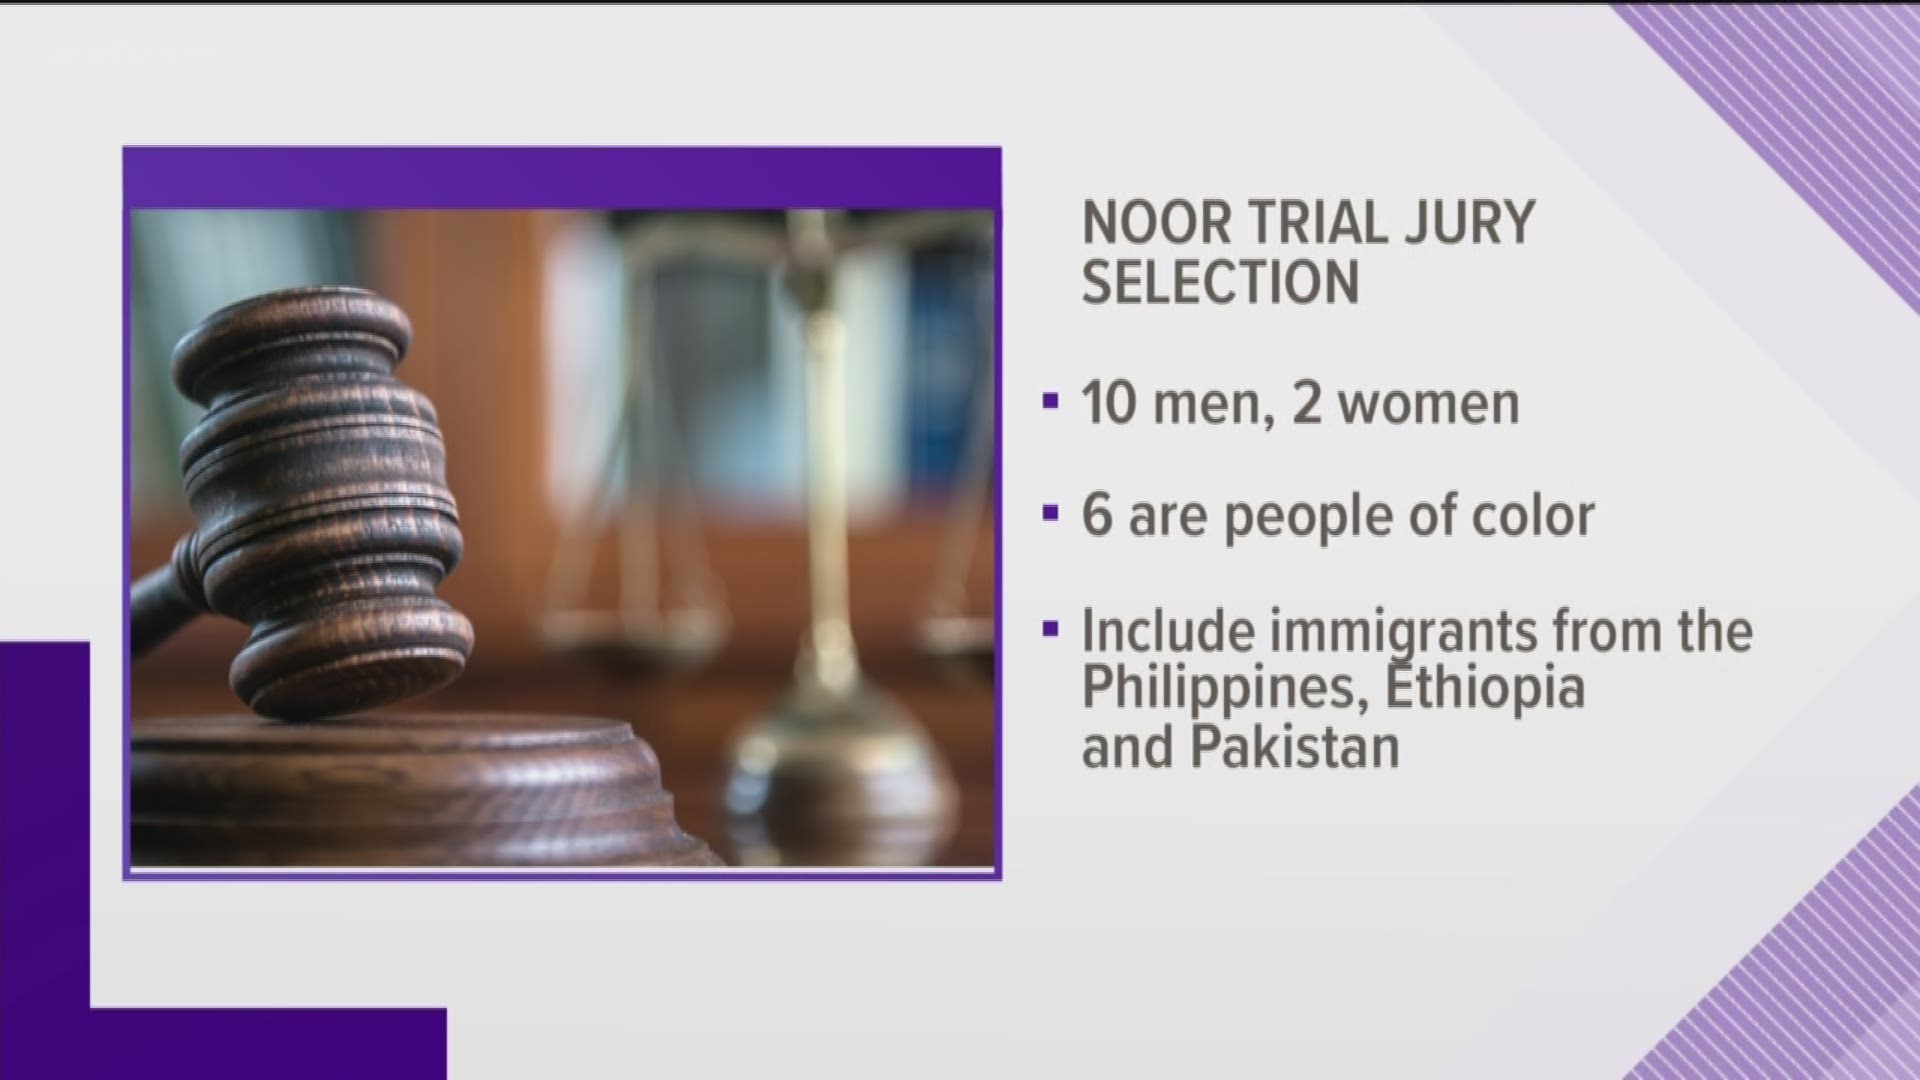 A jury of 10 men and 2 women, along with 2 men and 2 women serving as alternates, will hear the evidence in Mohamed Noor's trial in the shooting death of Justine Damond. KARE 11's Lou Raguse offers a summary of each of the people serving on the jury. https://kare11.tv/2YUvuLP